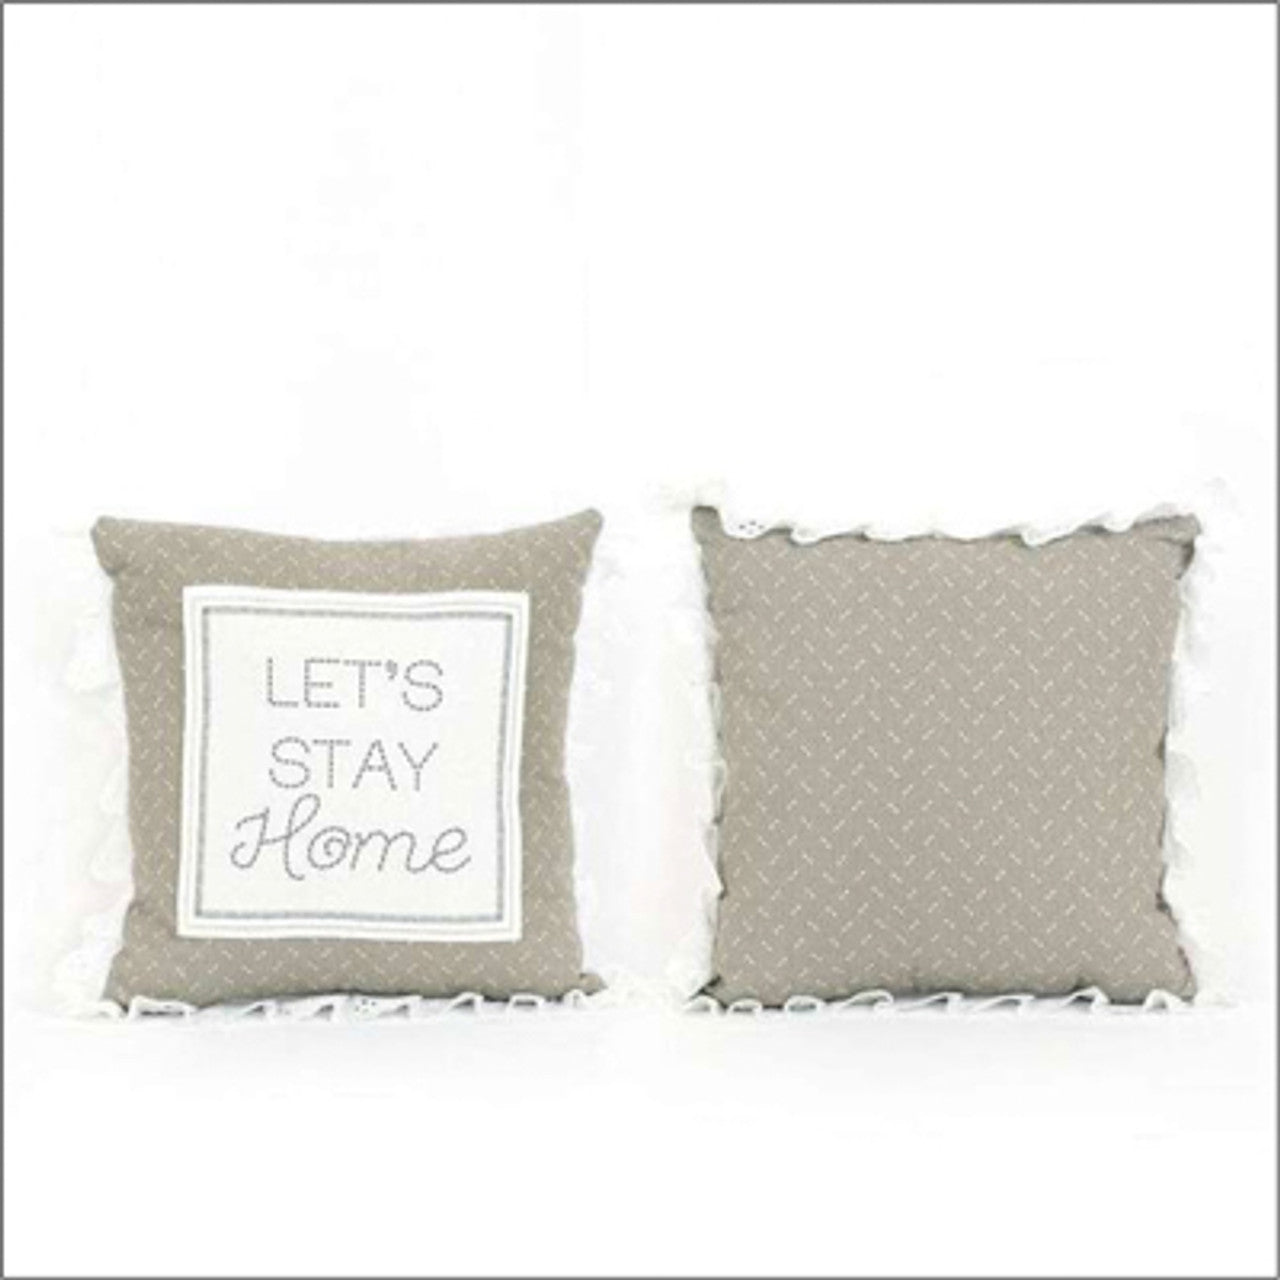 PILLOW 17X17 LETS STAY HOME REVERSIBLE WHITE/GRAY LINEN/LACE